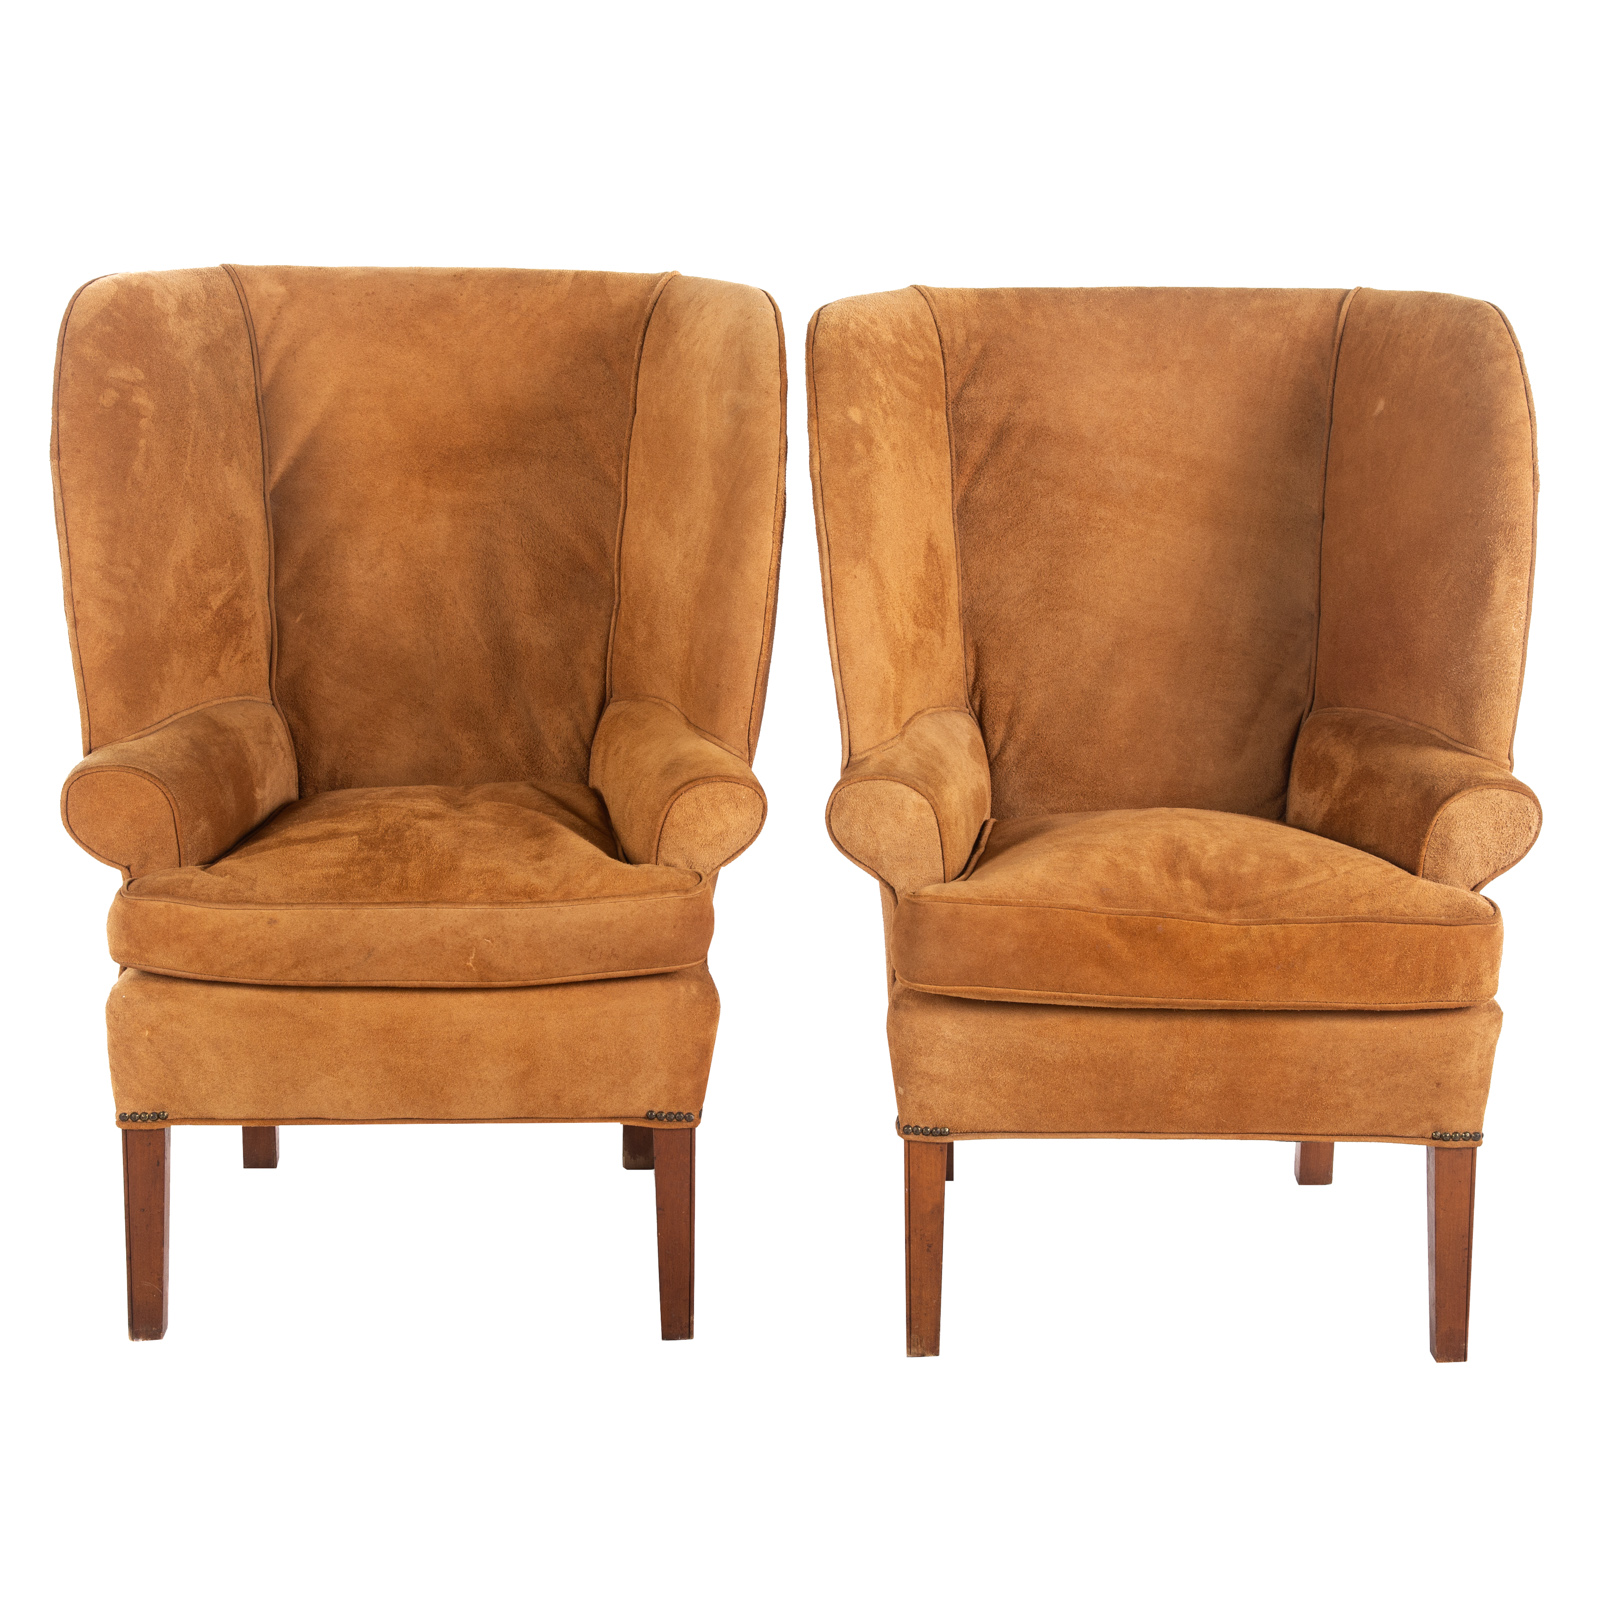 A PAIR OF CONTEMPORARY SUEDE UPHOLSTERED 369441